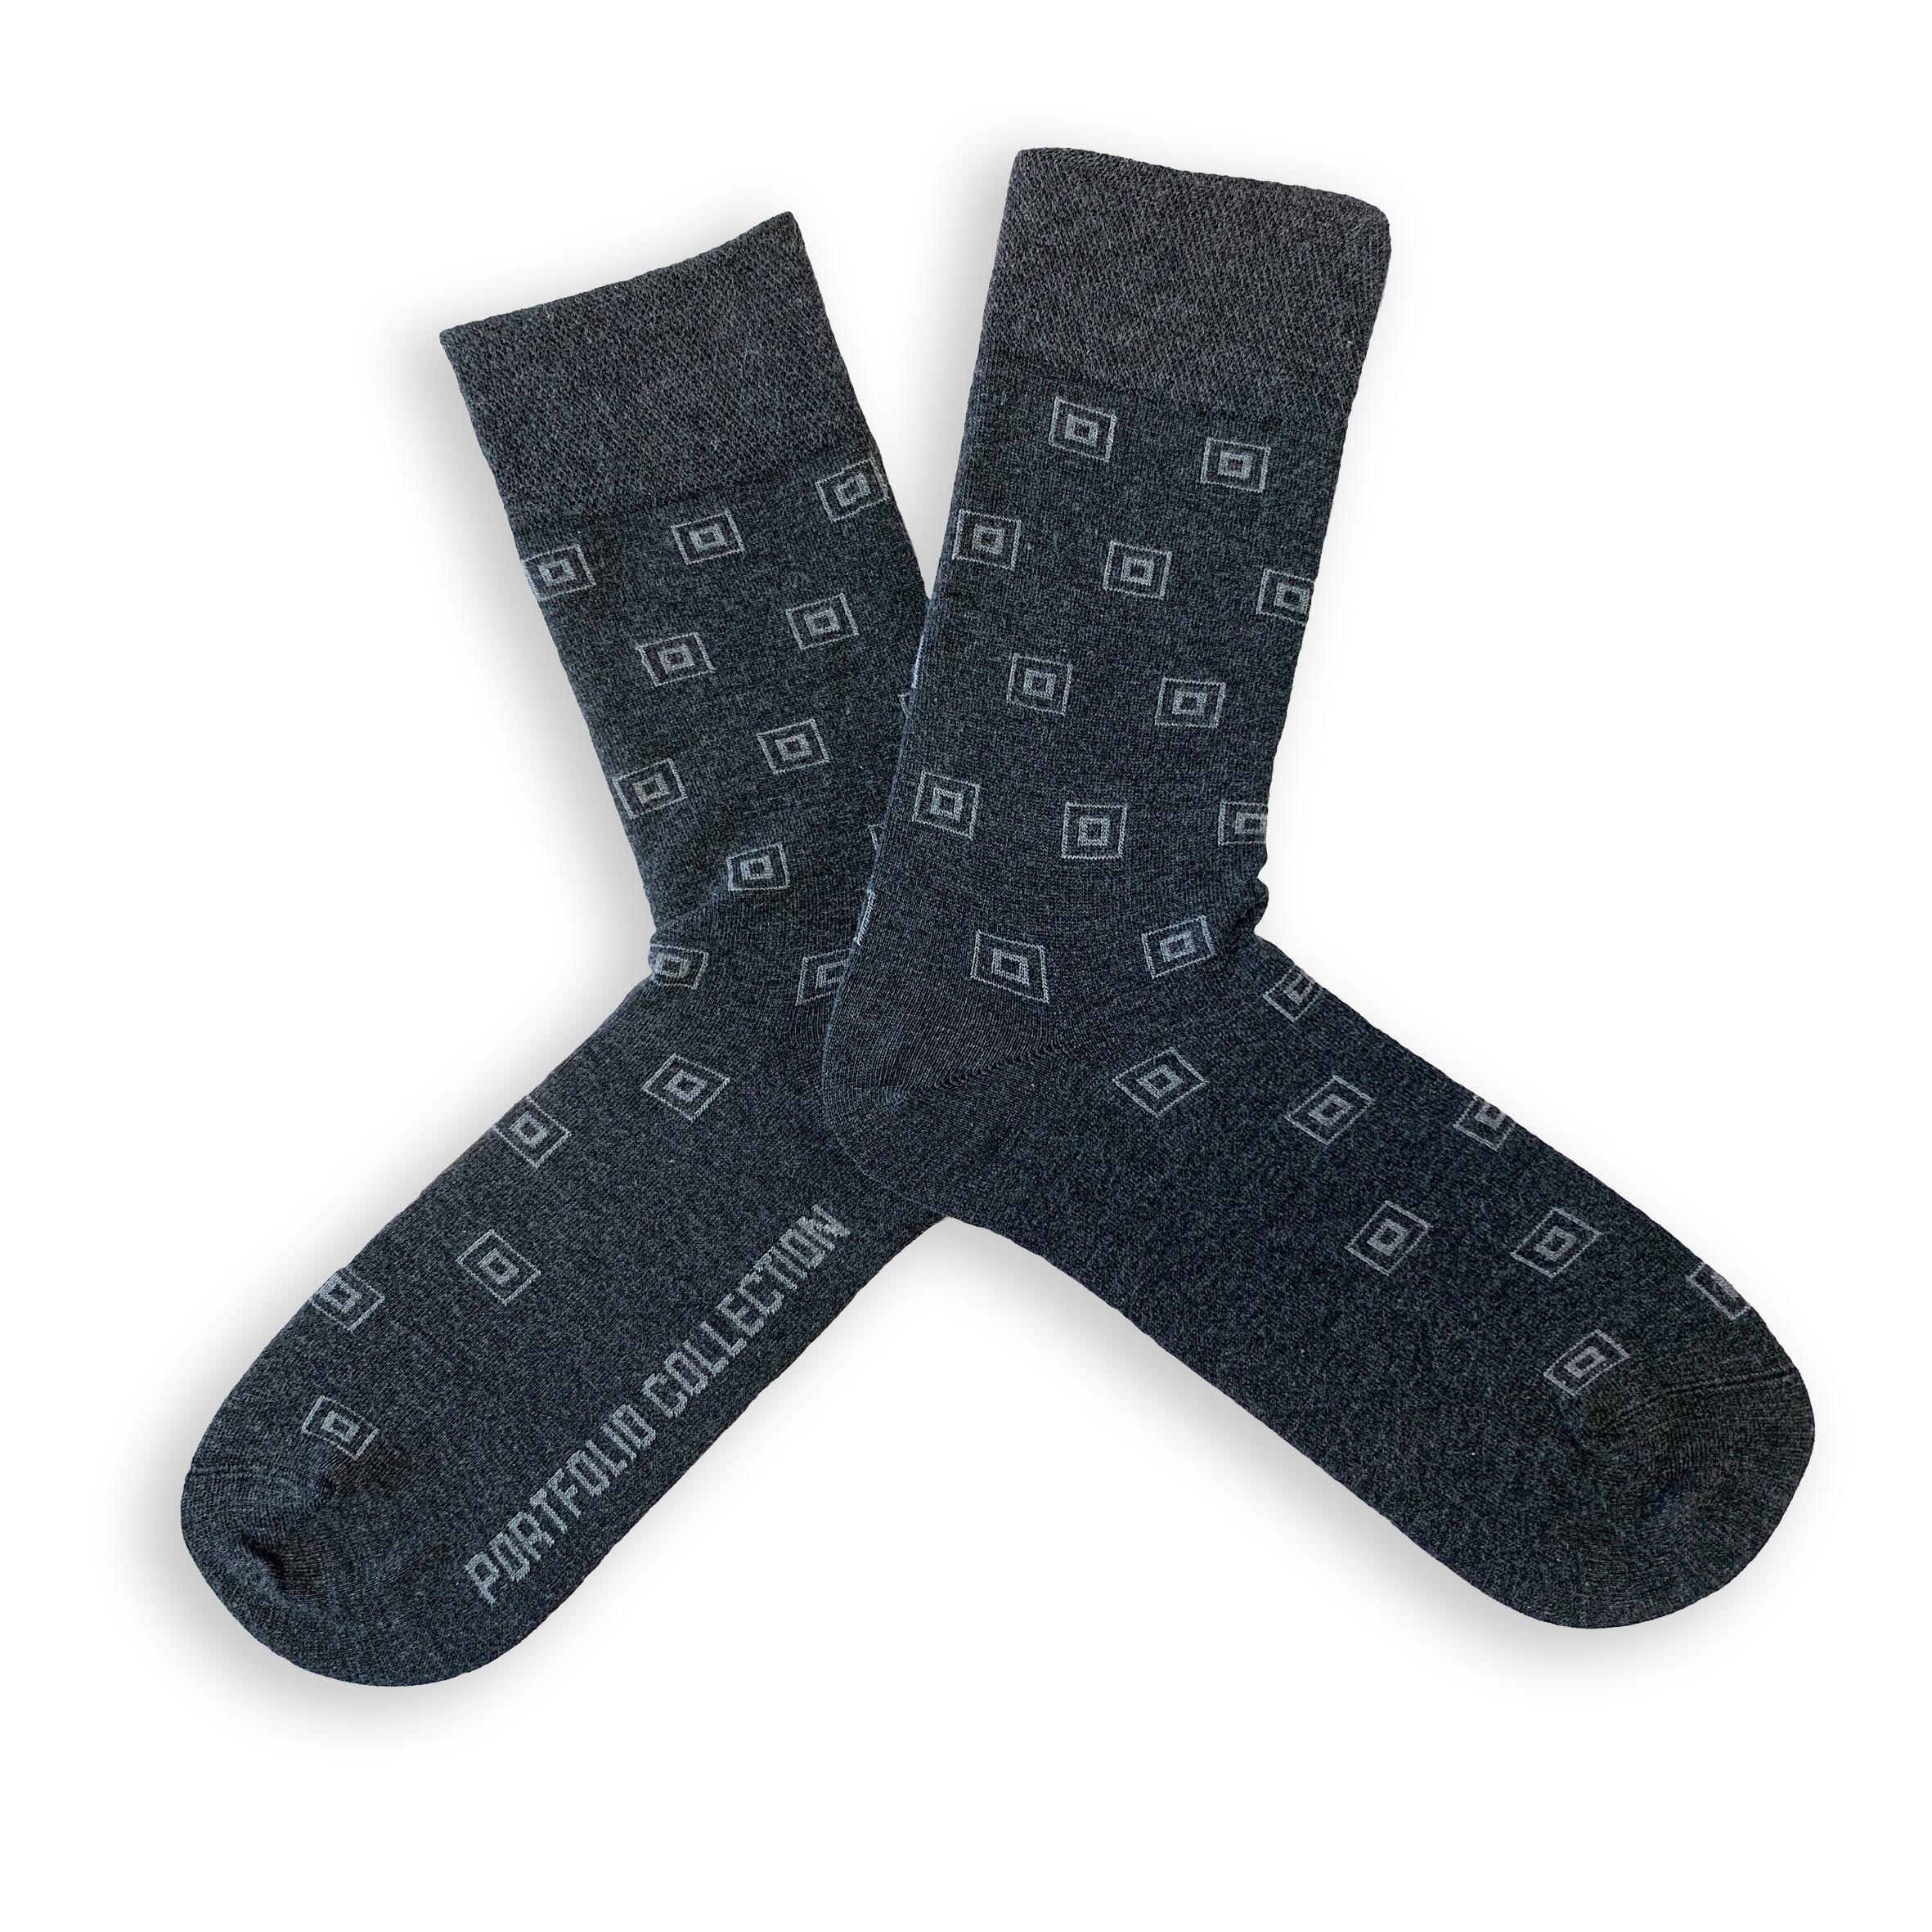 Charcoal grey square patterned luxurious super soft bamboo socks